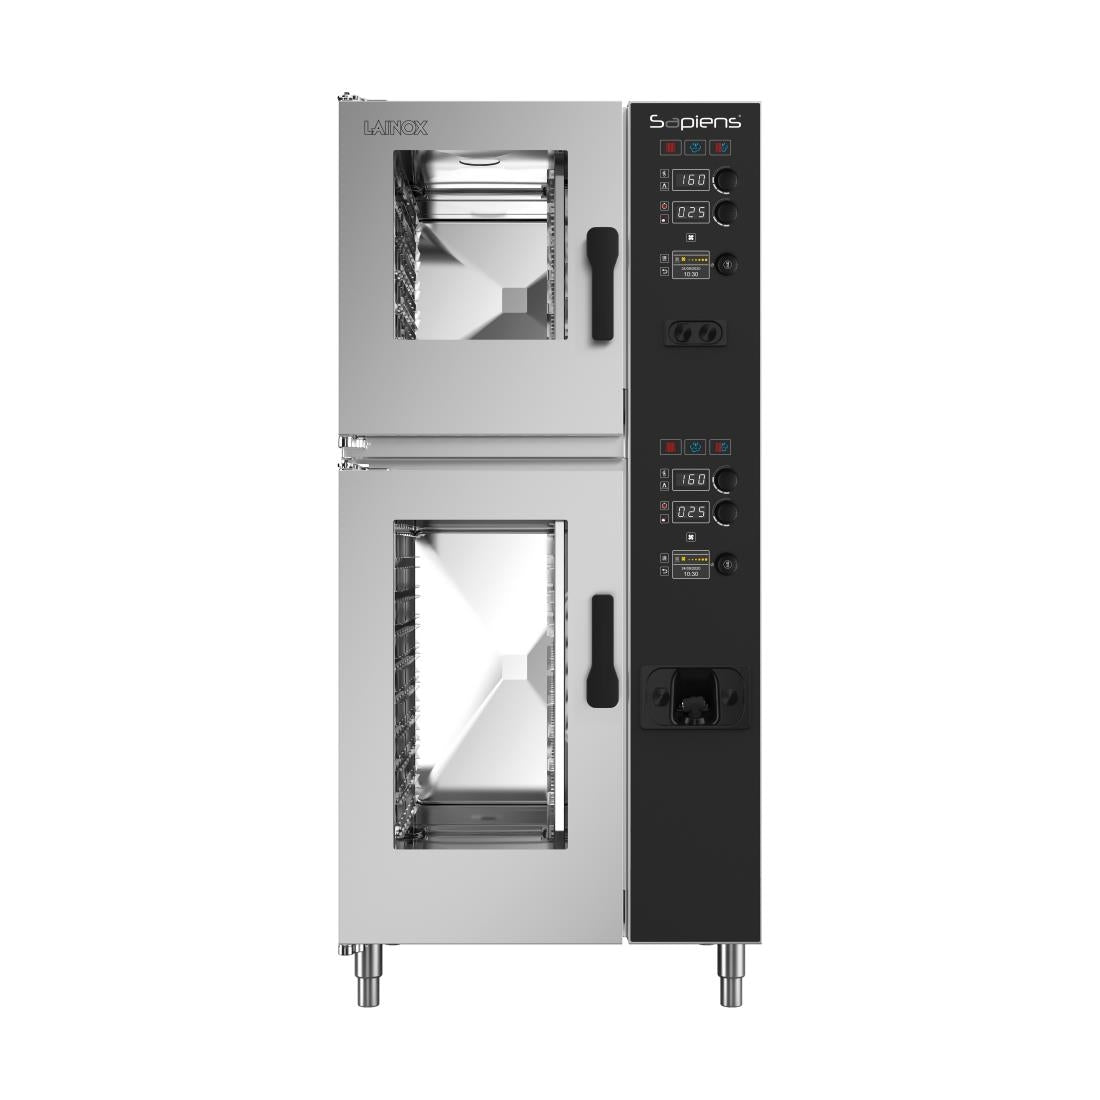 HP591 Lainox Sapiens Boosted Gas Touch Screen Combi Oven SAG161BV 16X1/1GN JD Catering Equipment Solutions Ltd